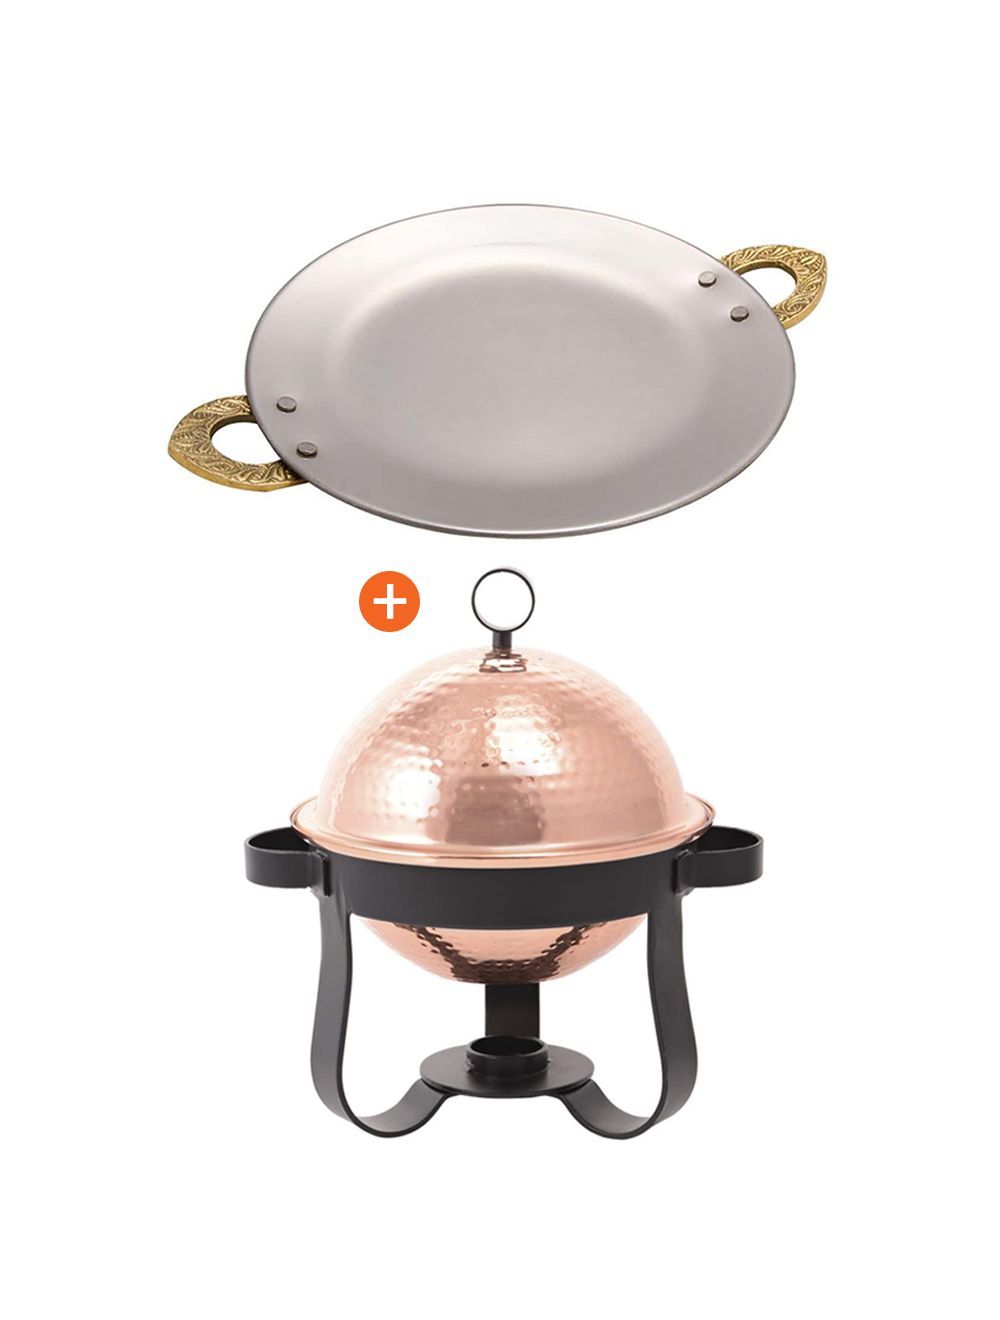 Combo Of Raj Copper Mini Food Warmer 1 Litre With Copper Serving Tray-MCD5008+TCT002